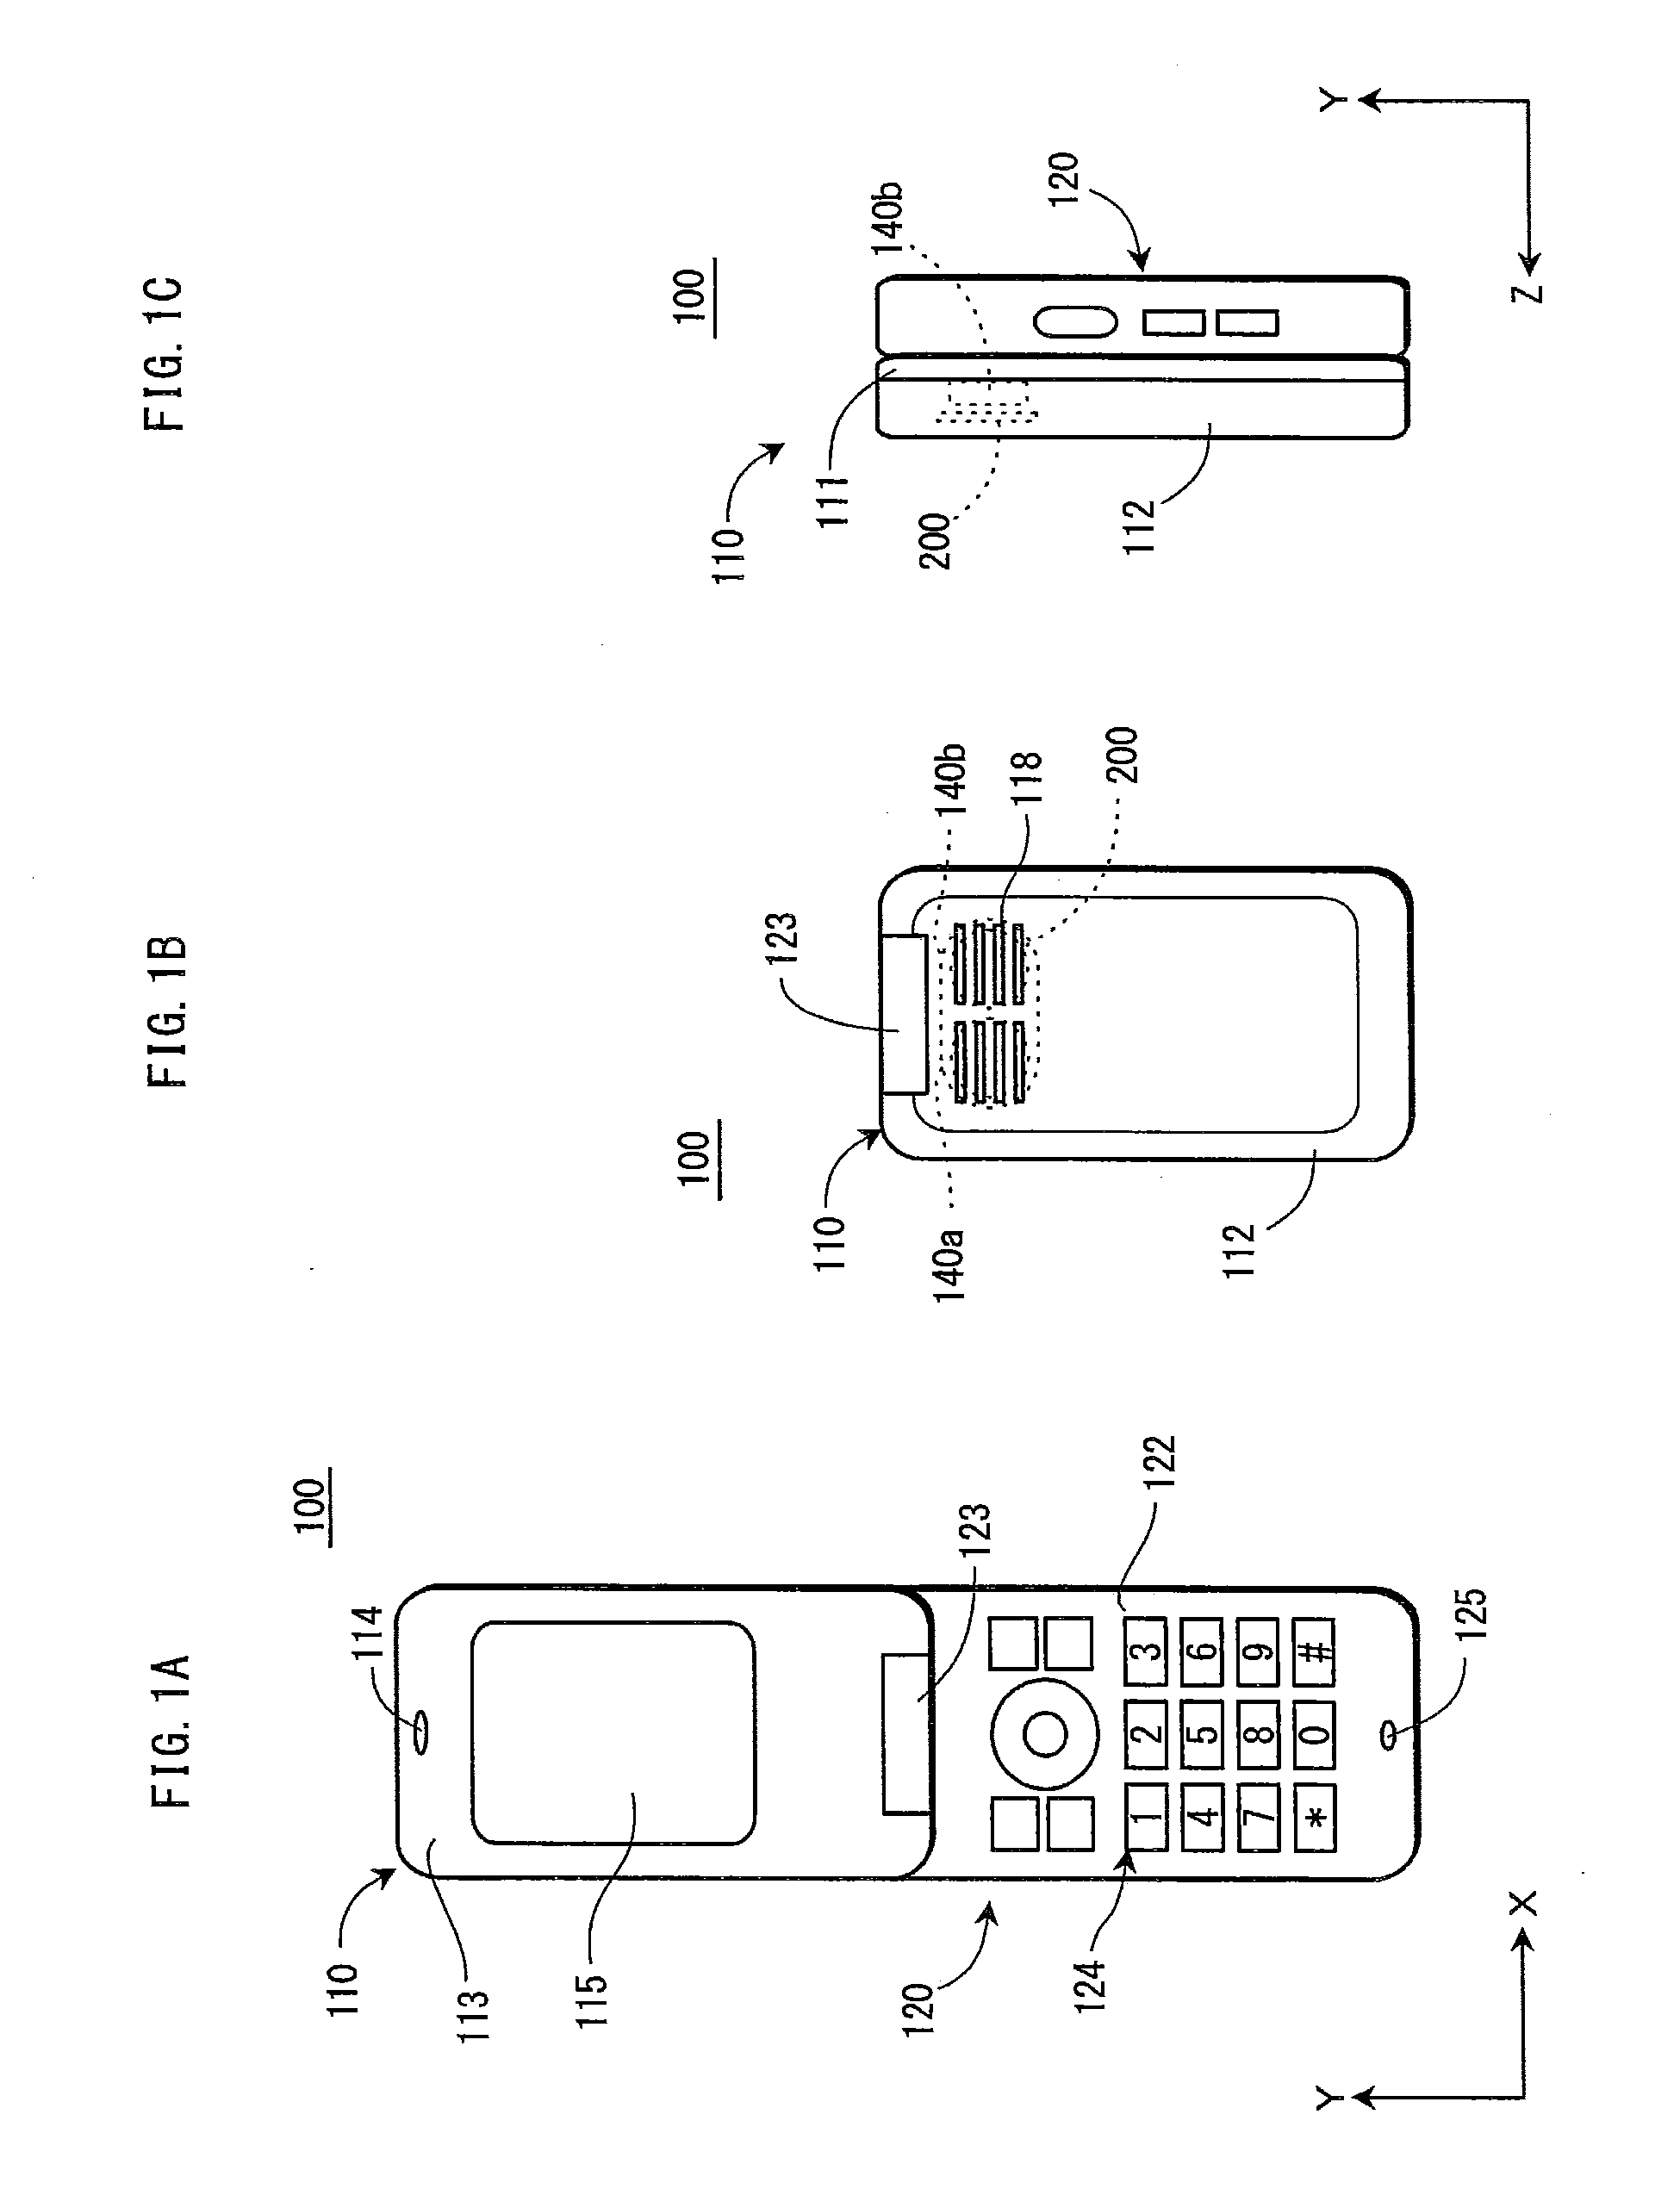 Cover unit covering openings and an electronic device provided with the cover unit